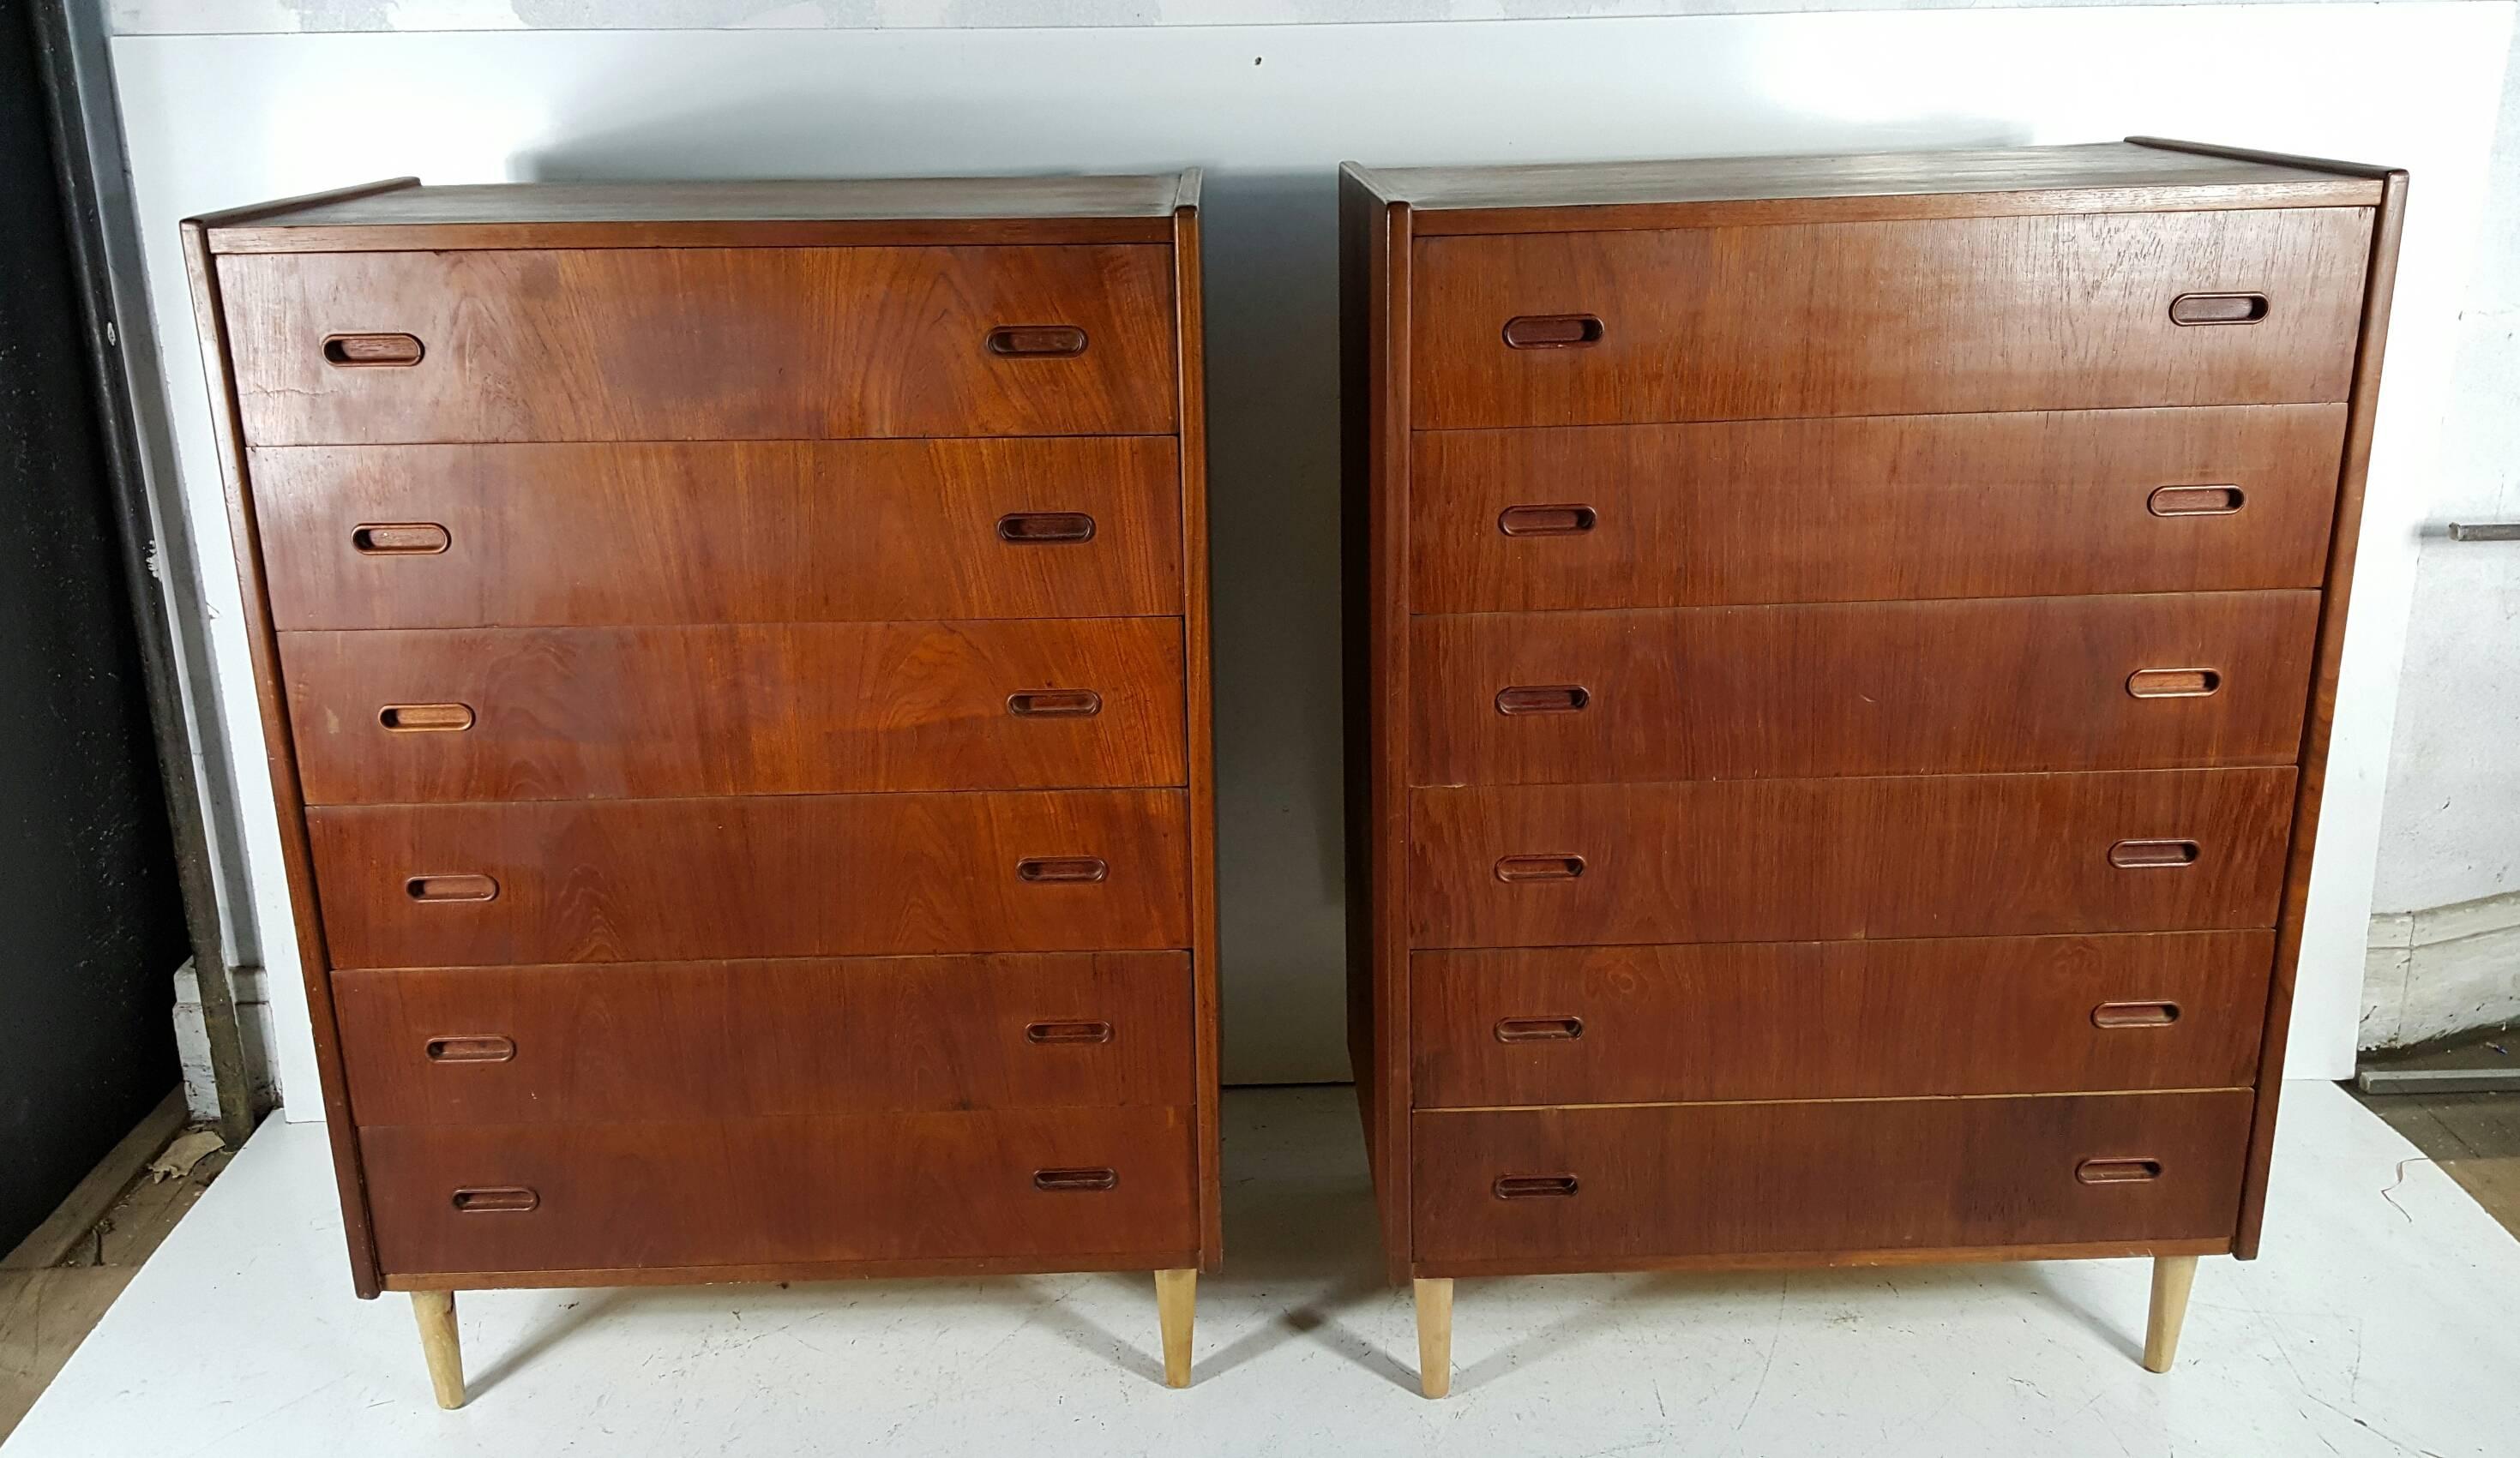 Pair of Arne Vodder for Falster Teak Danish Bachelor's Chests In Good Condition For Sale In Buffalo, NY